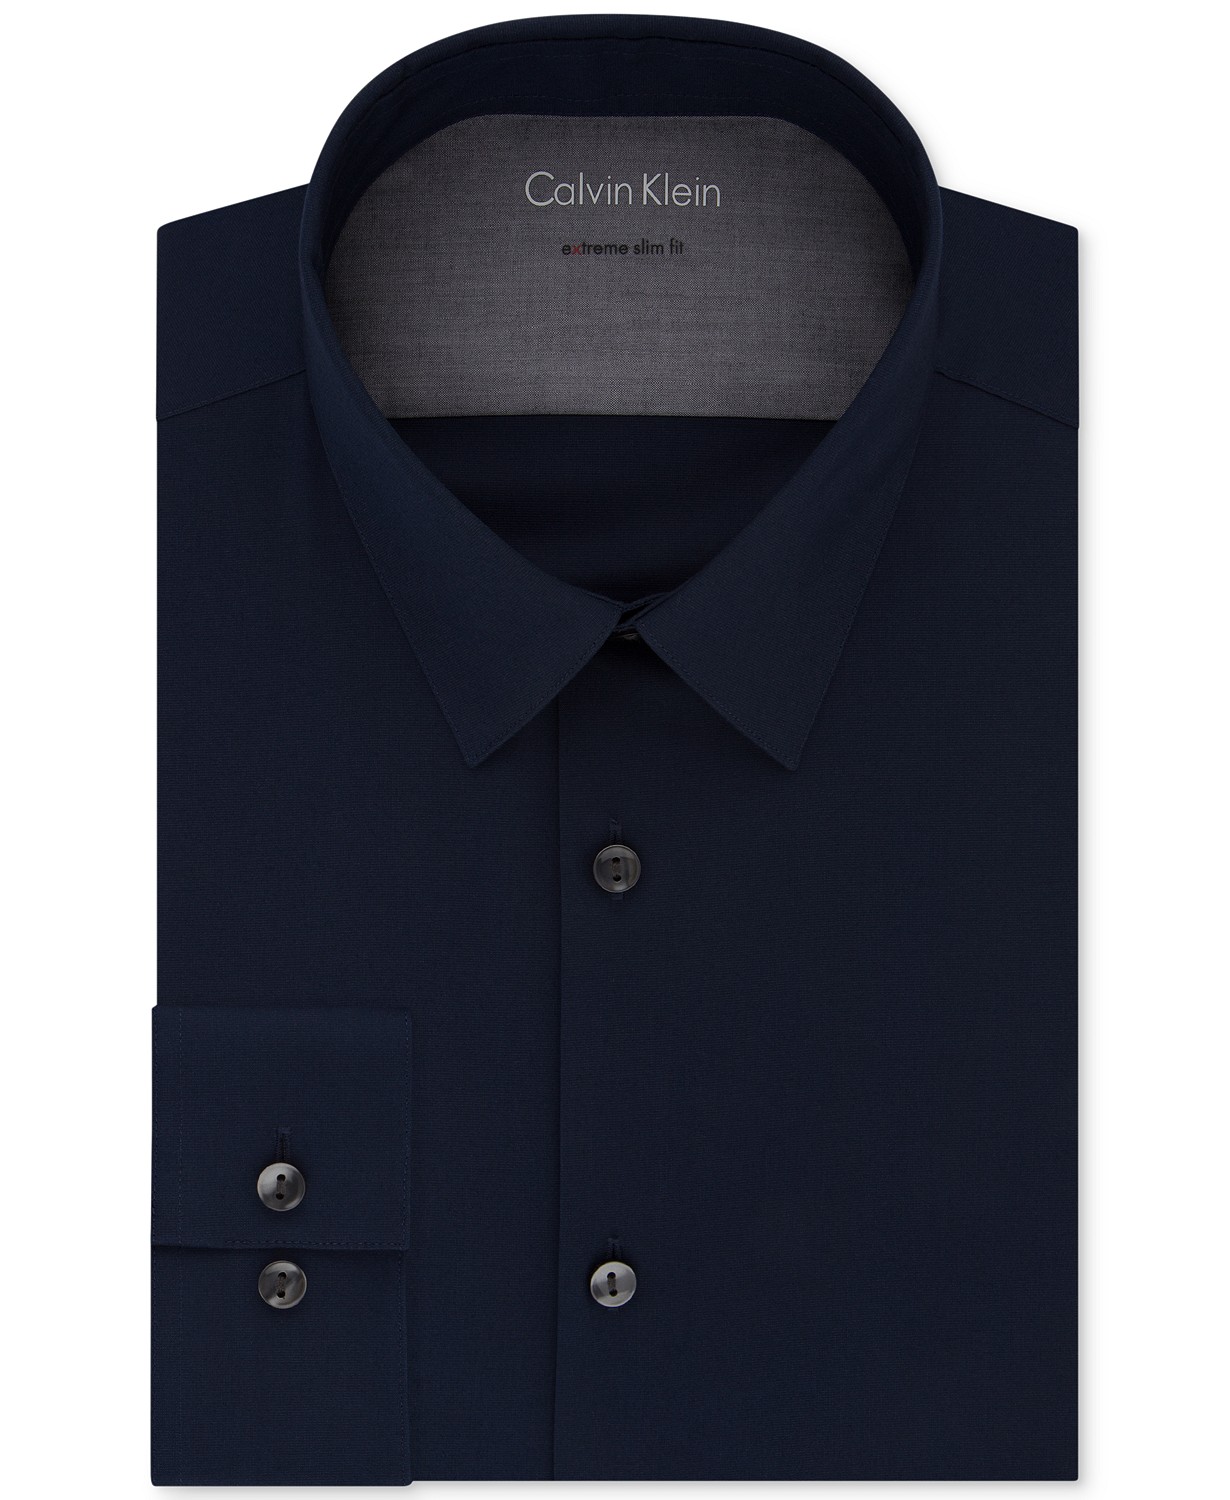 woocommerce-673321-2209615.cloudwaysapps.com-calvin-klein-mens-navy-extra-slim-fit-thermal-stretch-performance-solid-dress-shirt